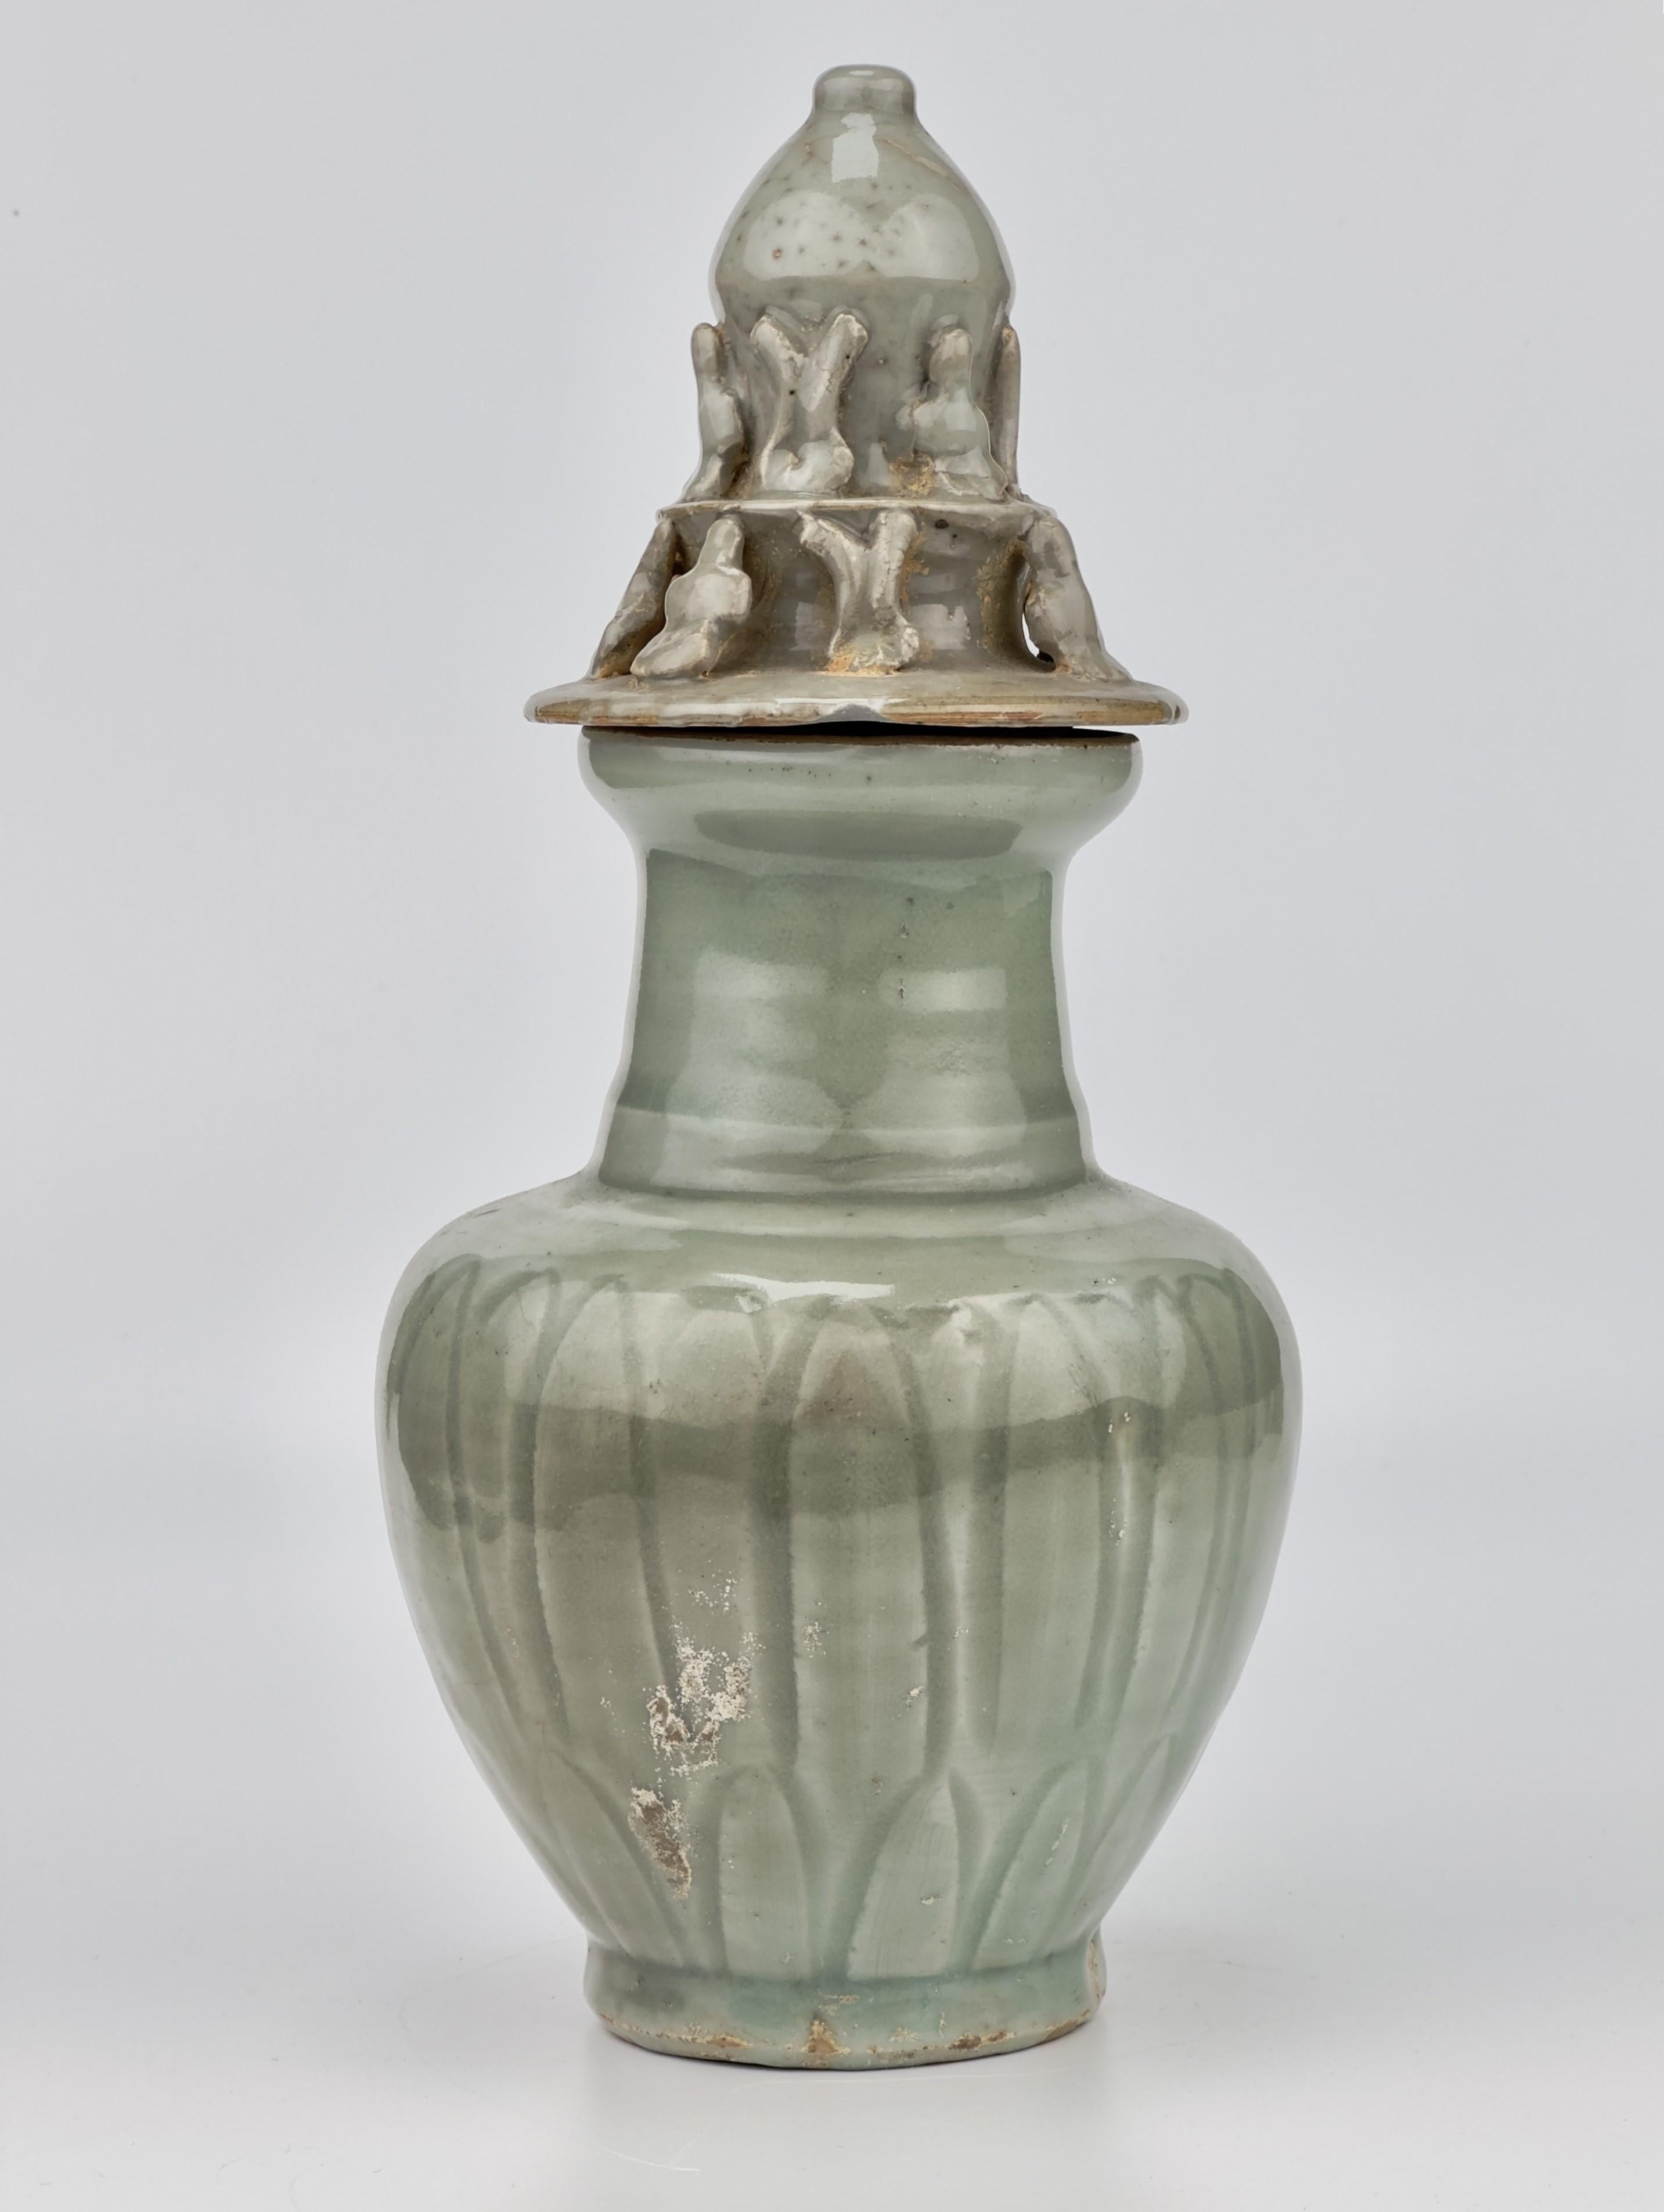 The vase features a ribbed body, subtly enhancing its graceful contours, and is topped with a uniquely sculpted lid adorned with figurative elements.

Period : Song Dynasty
Type : Celadon
Medium : Longquan ware
Size : 26cm(Height) x 7.5cm(Mouth